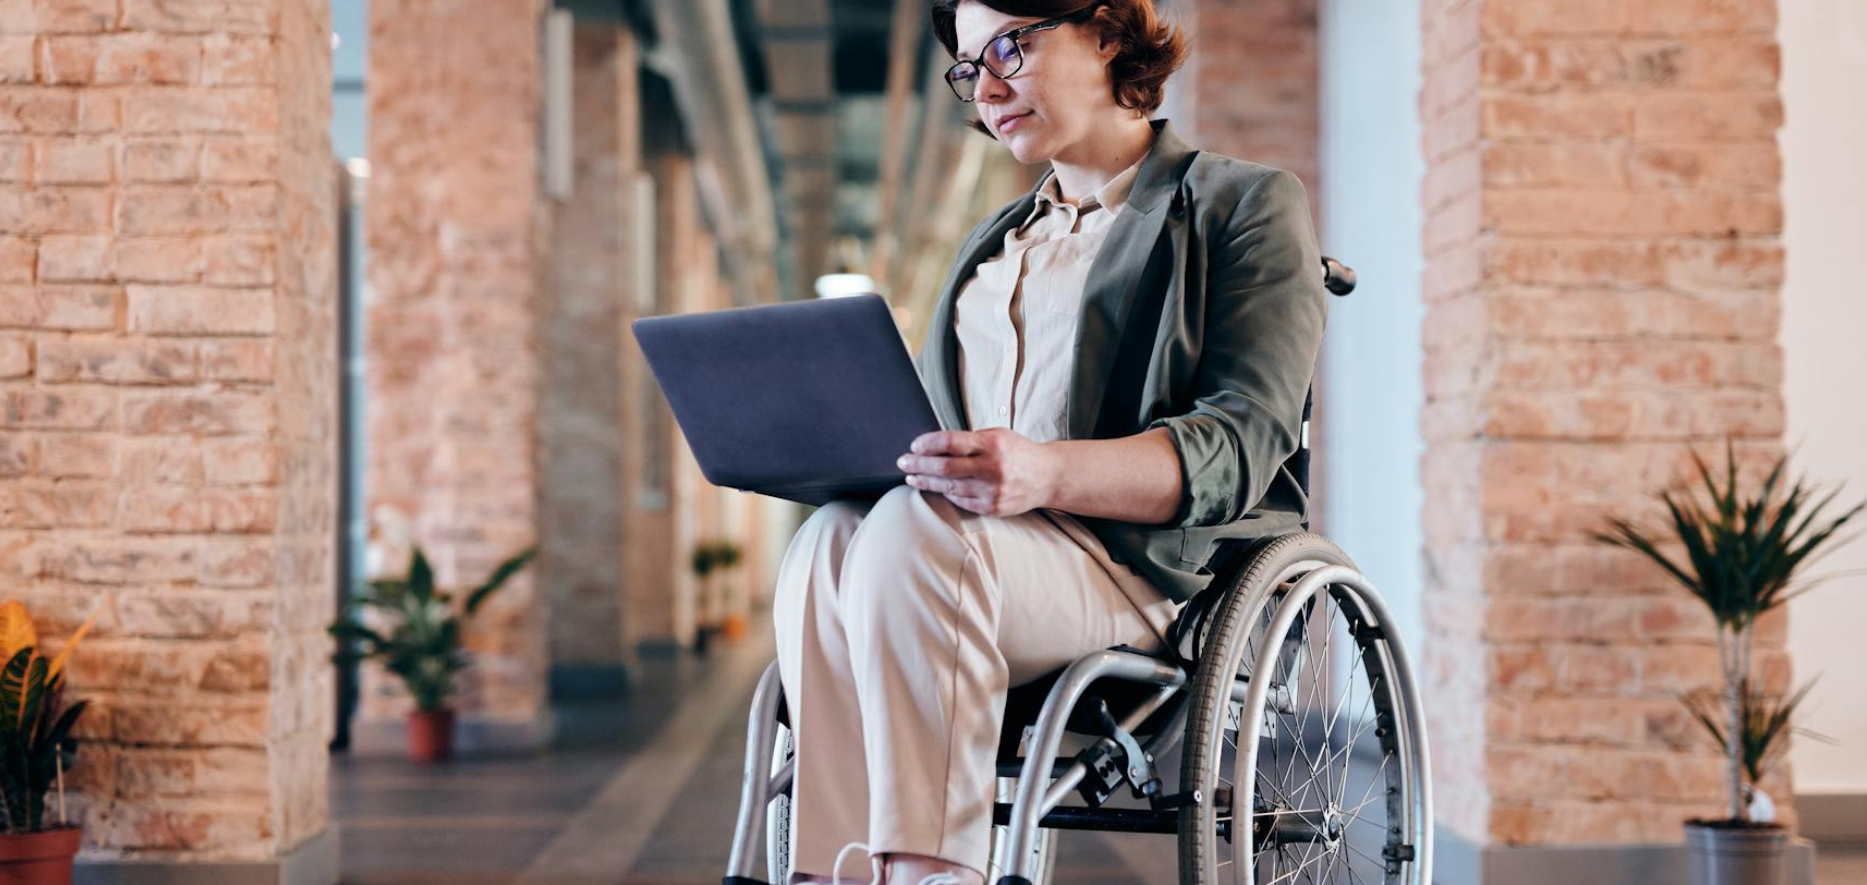 Leveraging Technology for Professional Success Among People With Disabilities